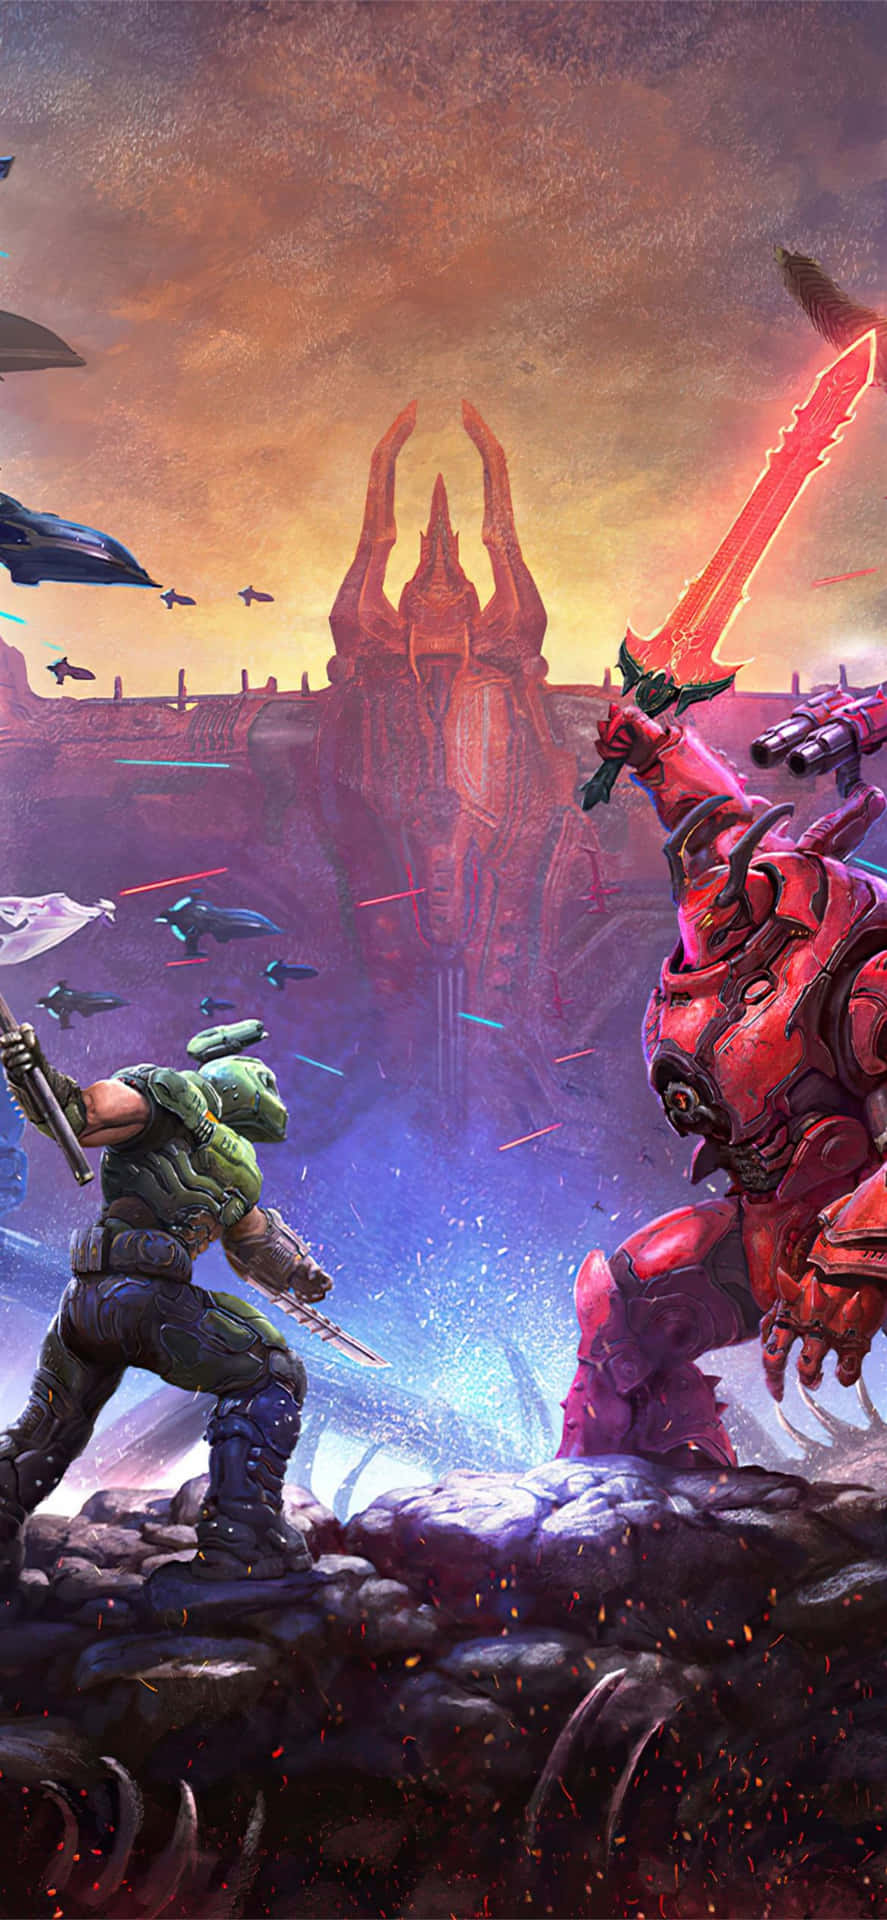 Get lost in the world of the epic Doom Eternal game on your iPhone. Wallpaper